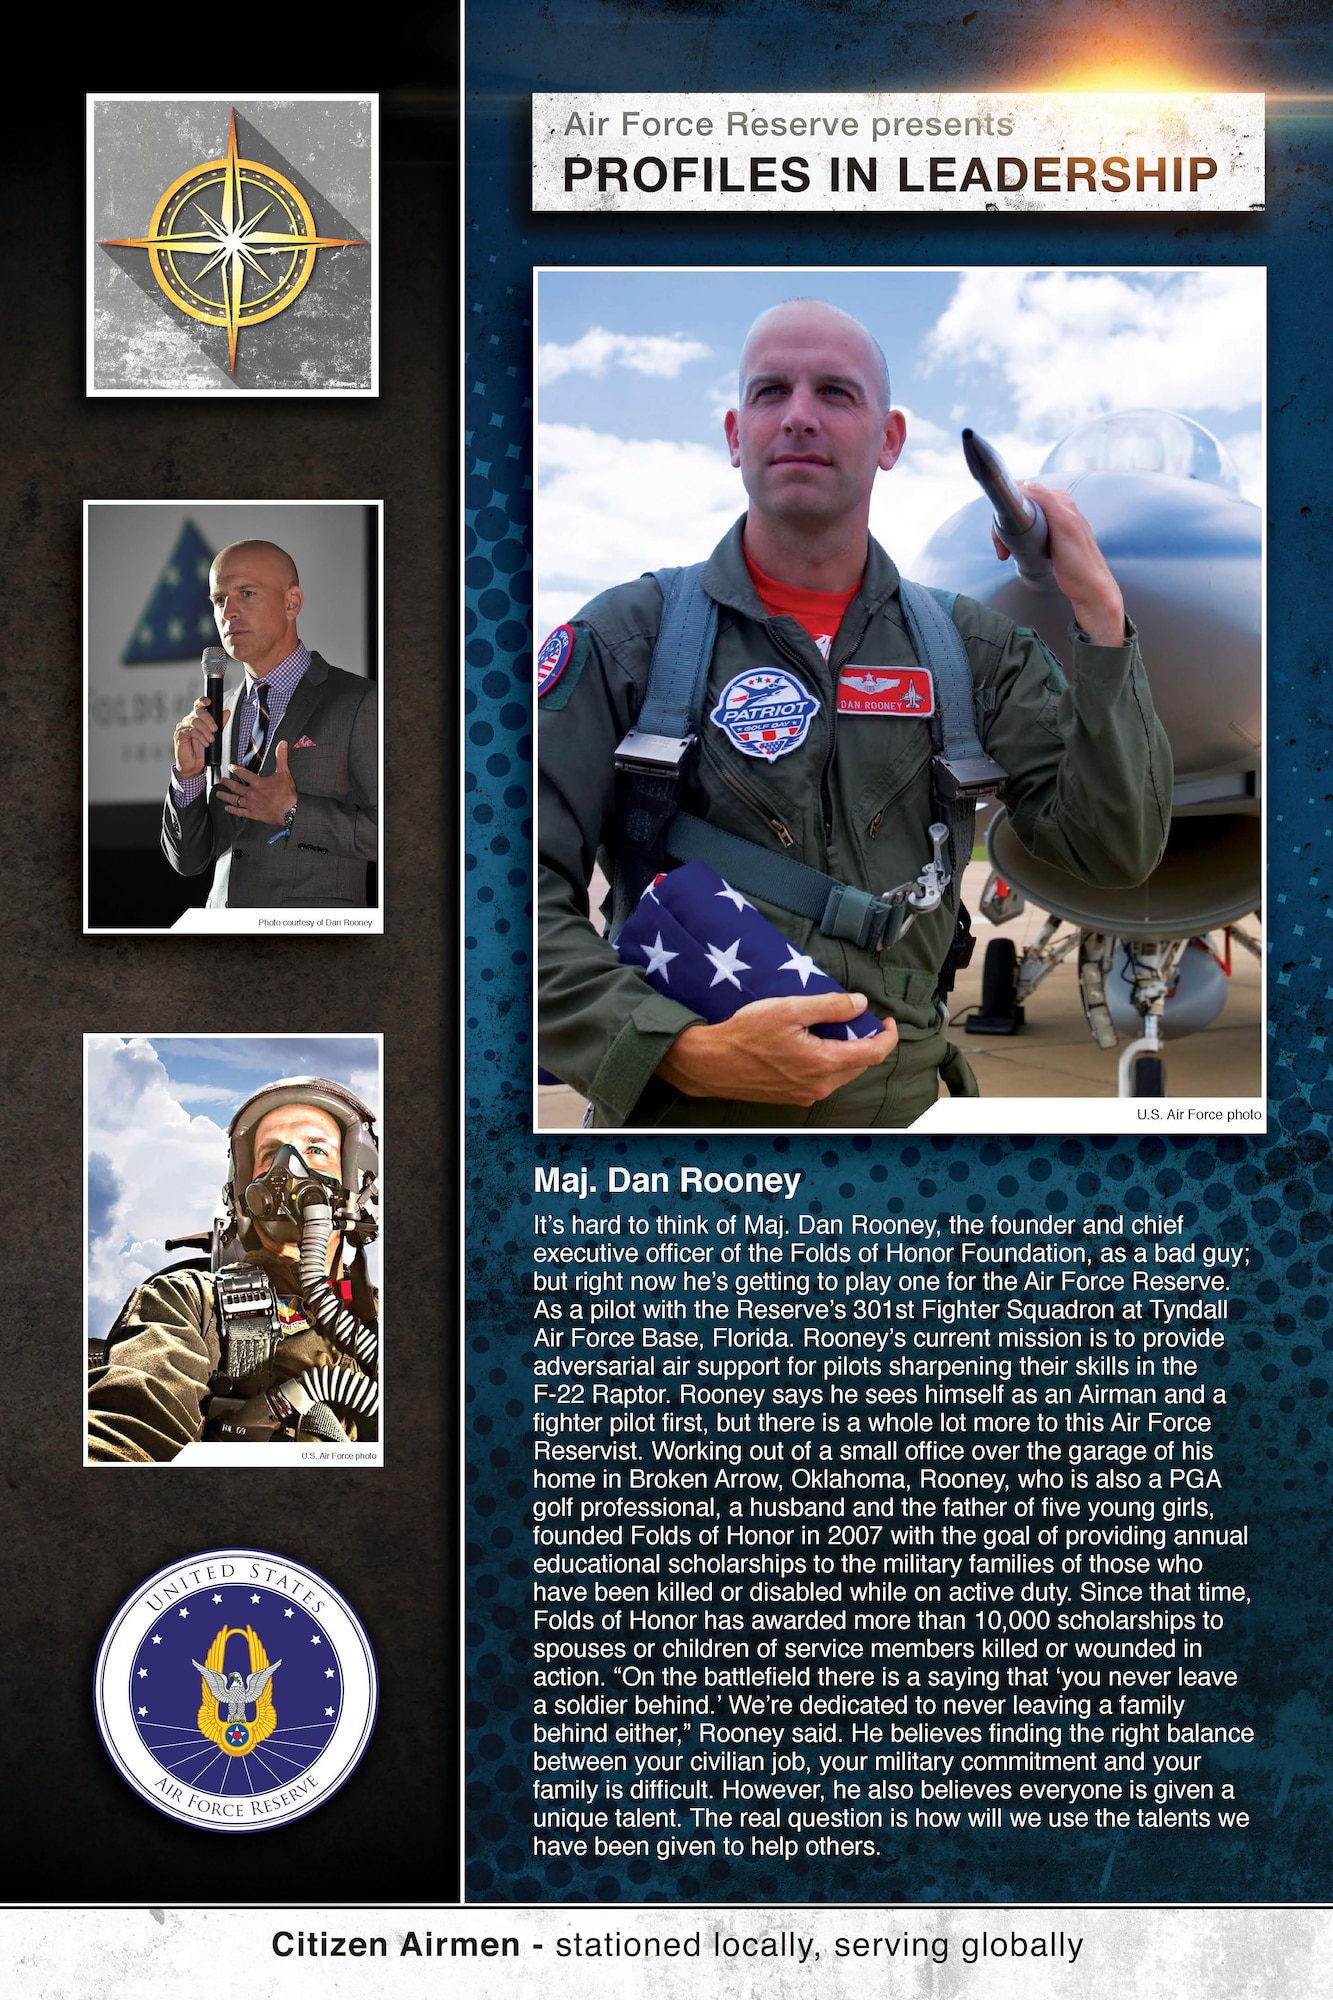 Maj Dan Rooney, 301st Fighter Squadron pilot and founder/CEO of Folds of Honor Foundation 